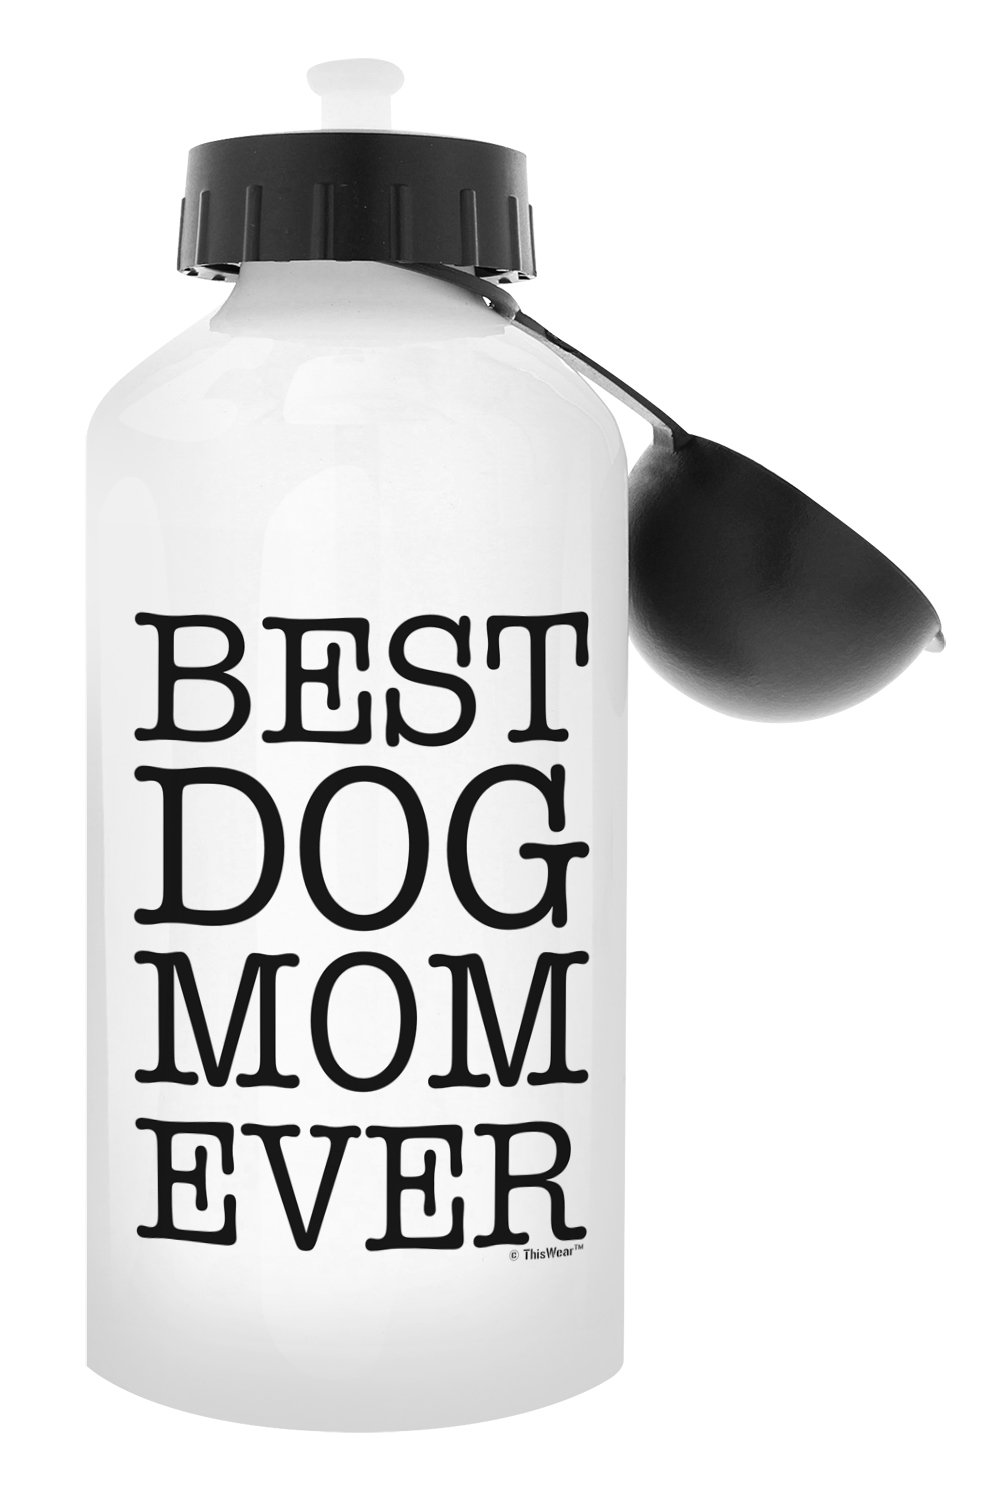 Dog Gifts for Women Best Dog Mom Ever Dog Gifts Dog Themed Aluminum